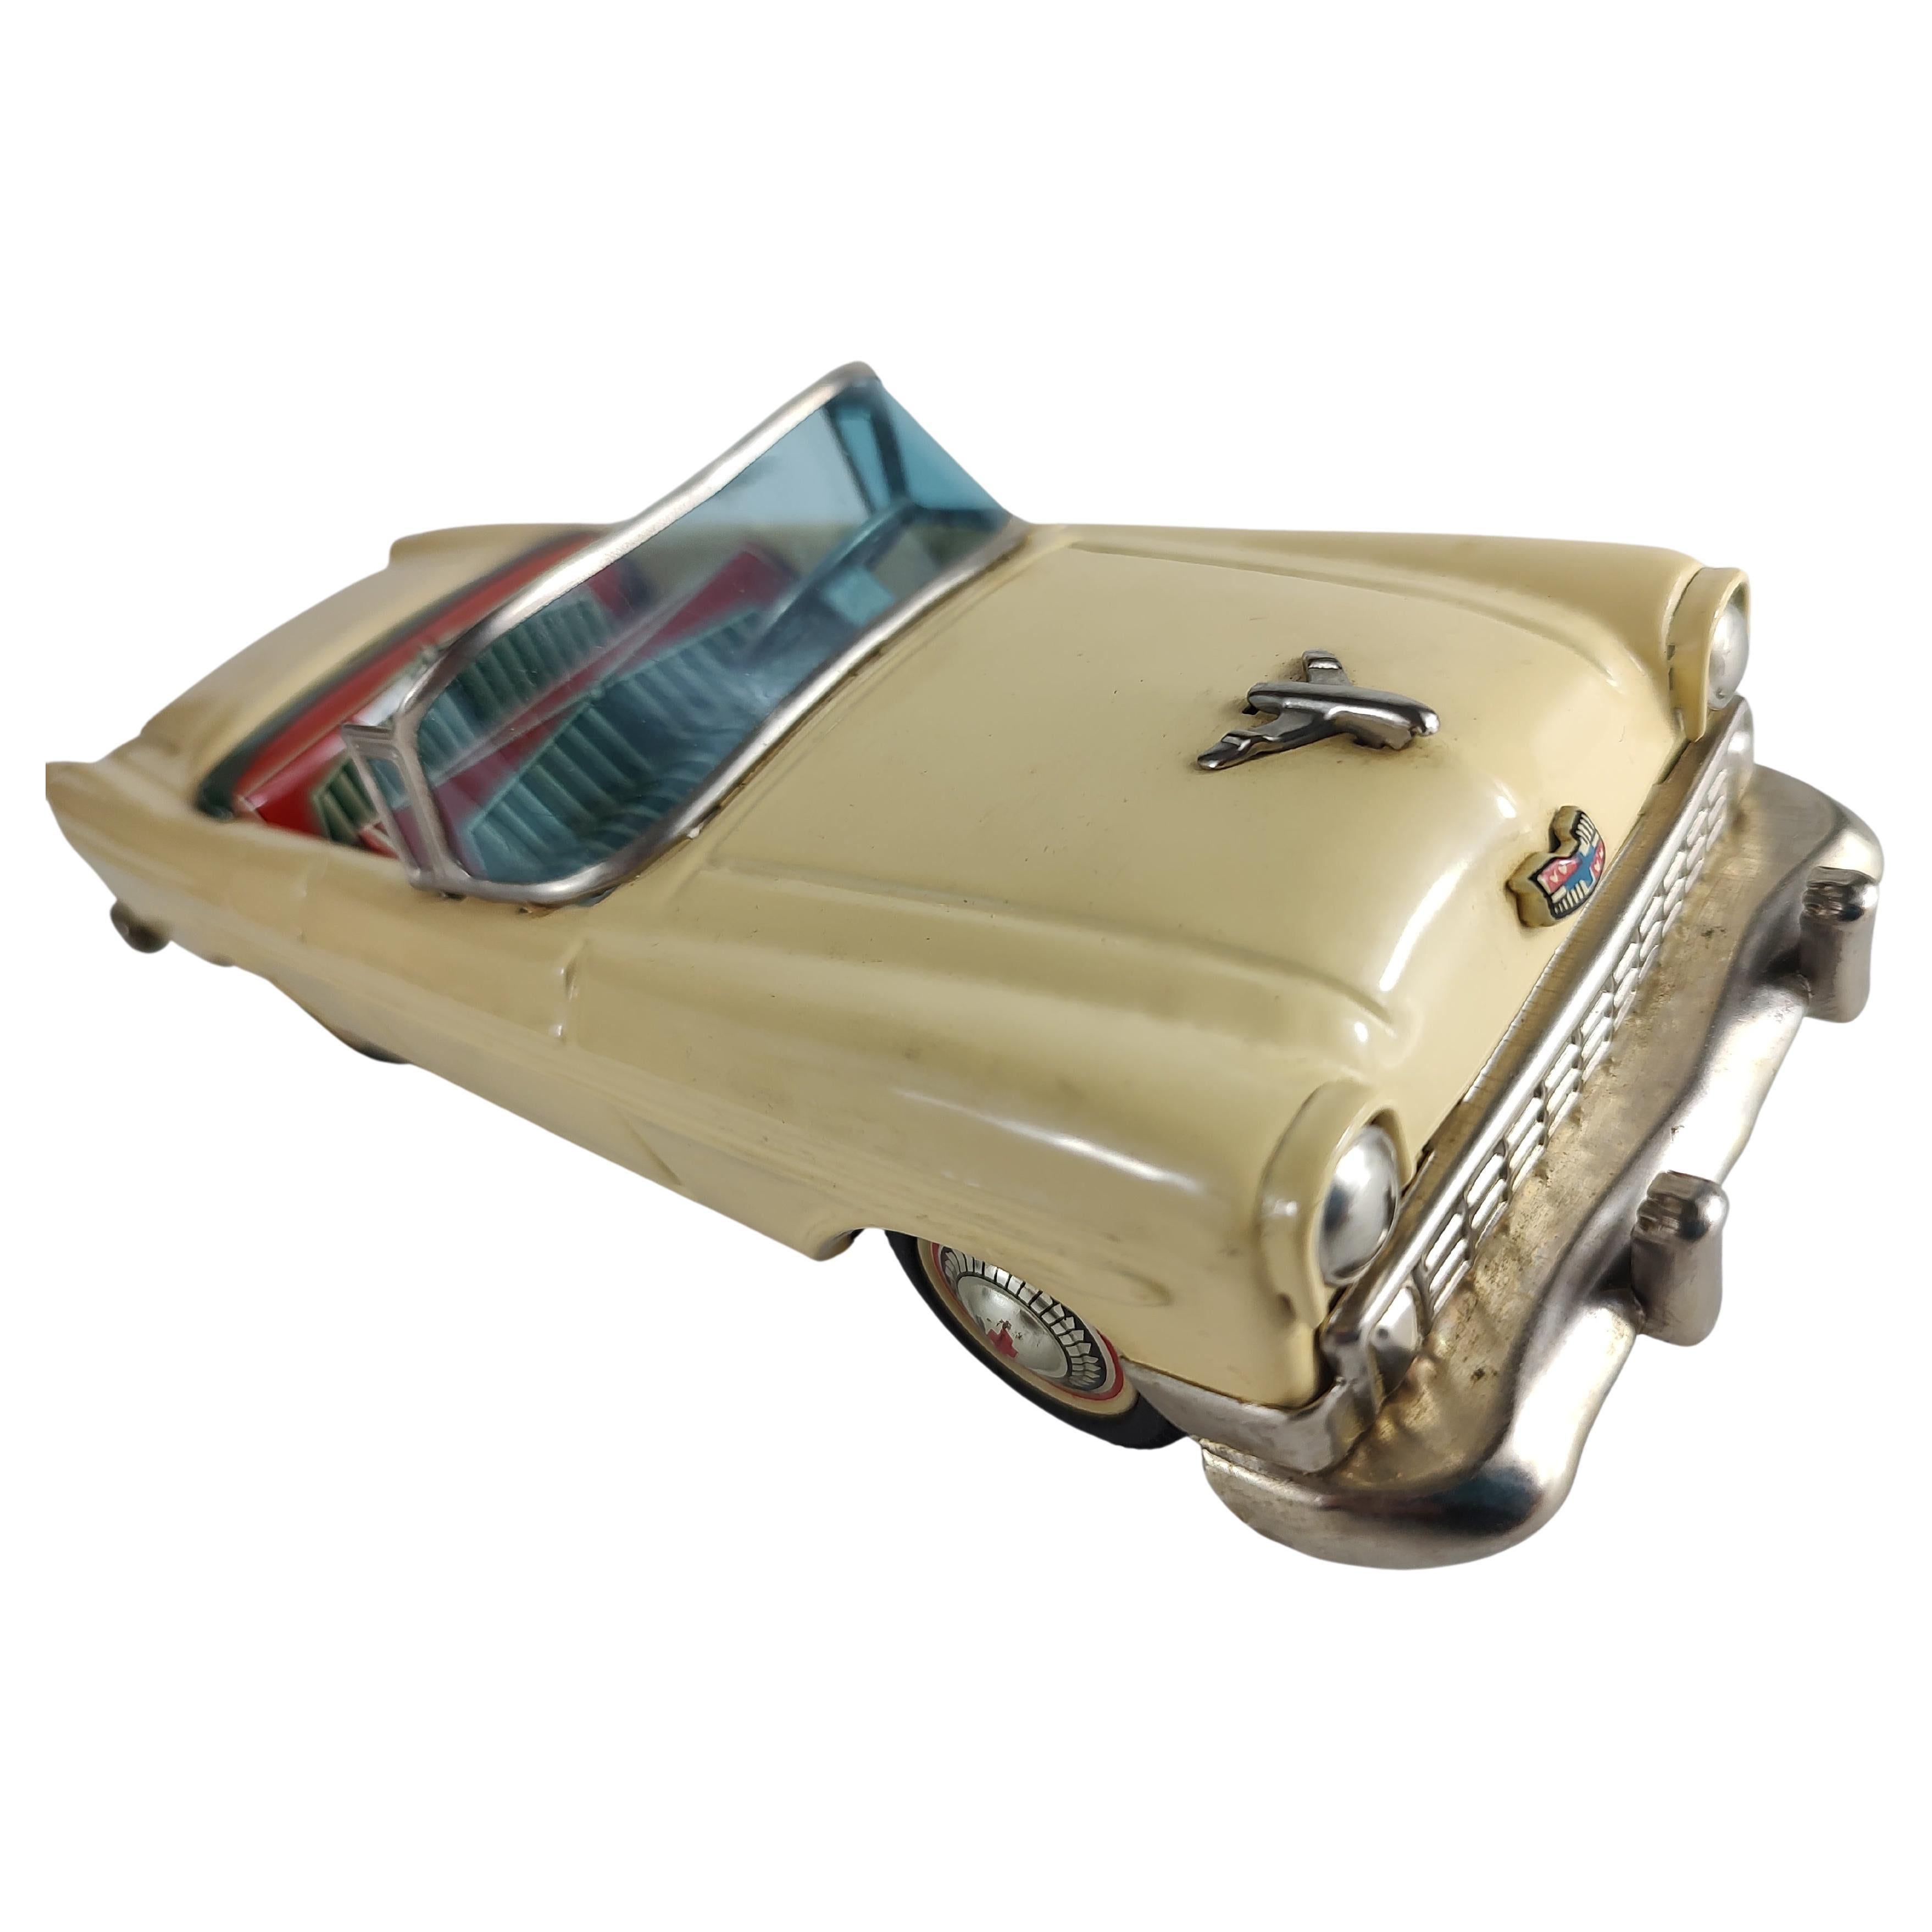 Midcentury Tin Litho Toy Car by Bandai Japan Chevy Convertible C1957